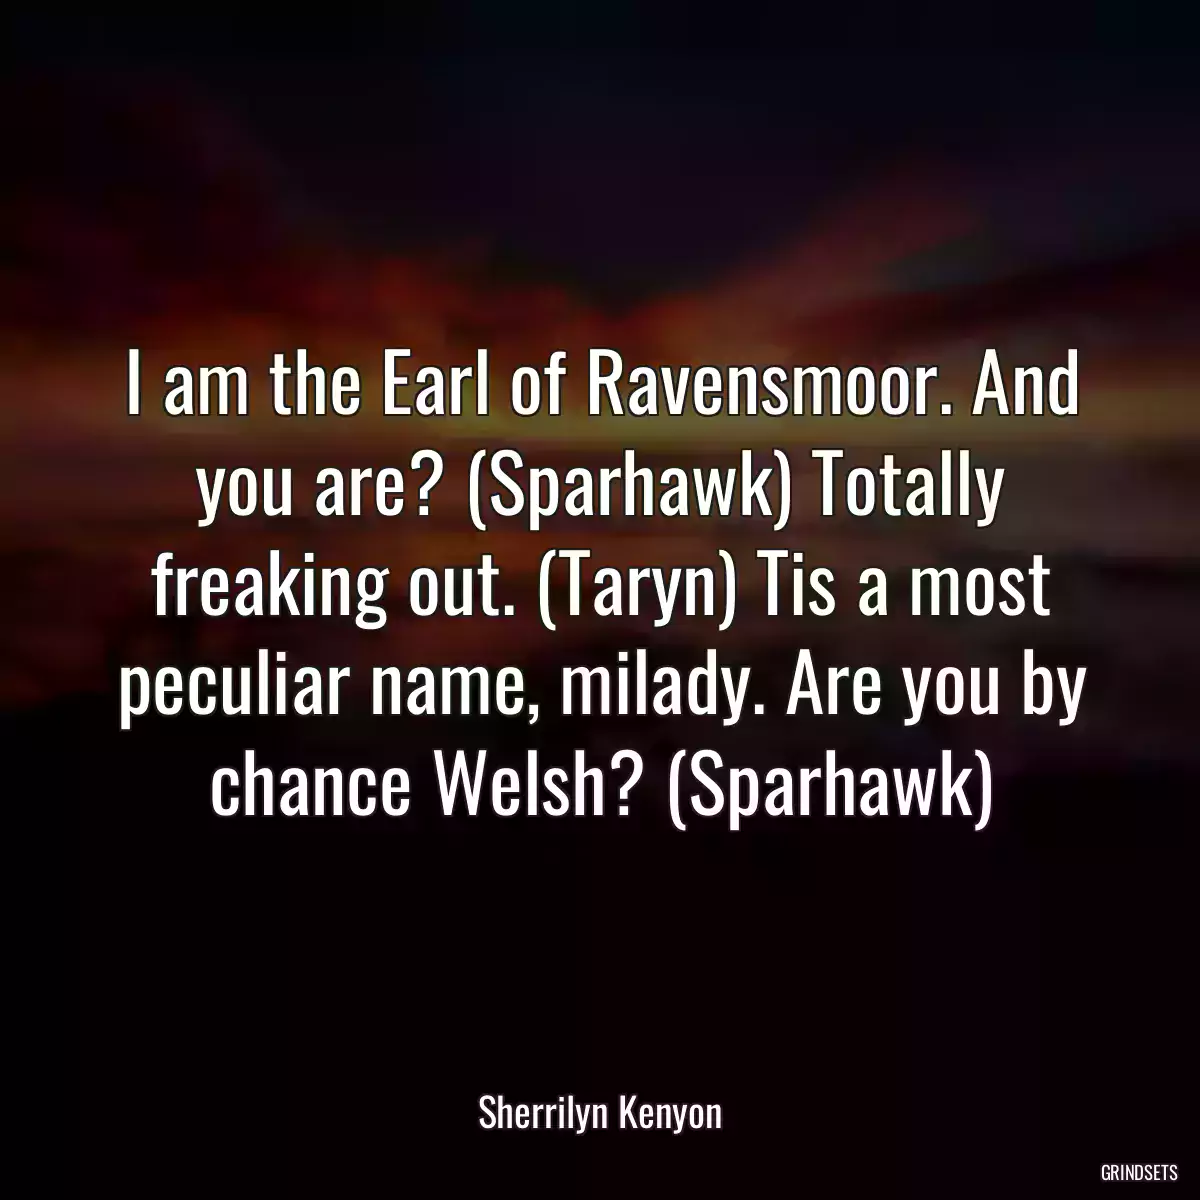 I am the Earl of Ravensmoor. And you are? (Sparhawk) Totally freaking out. (Taryn) Tis a most peculiar name, milady. Are you by chance Welsh? (Sparhawk)